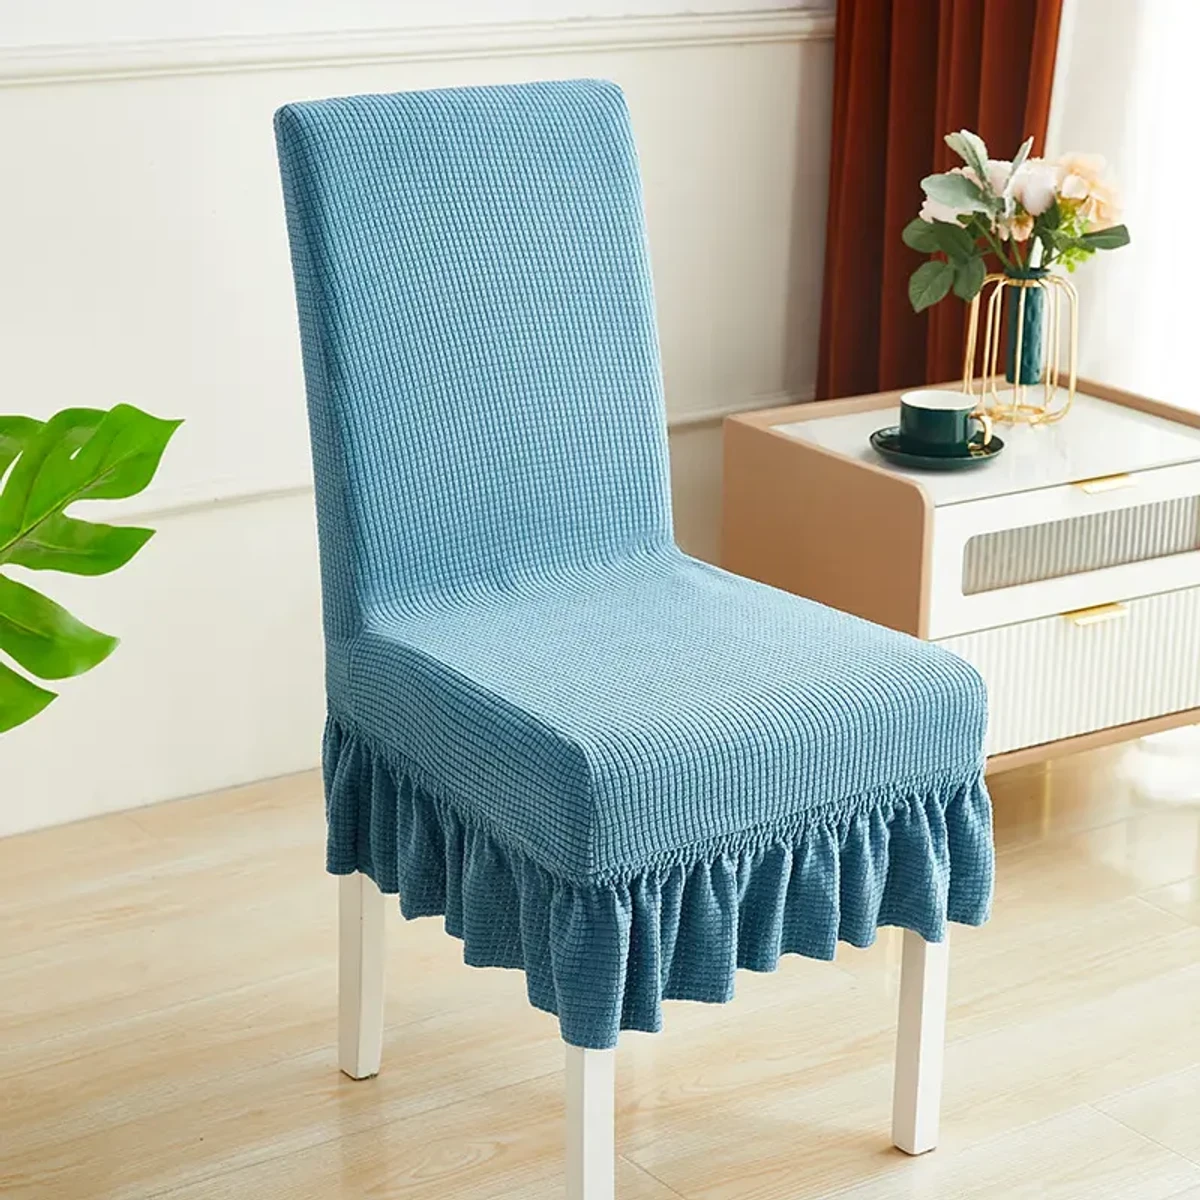 Solid Color Chair Covers for Dining Room Seat